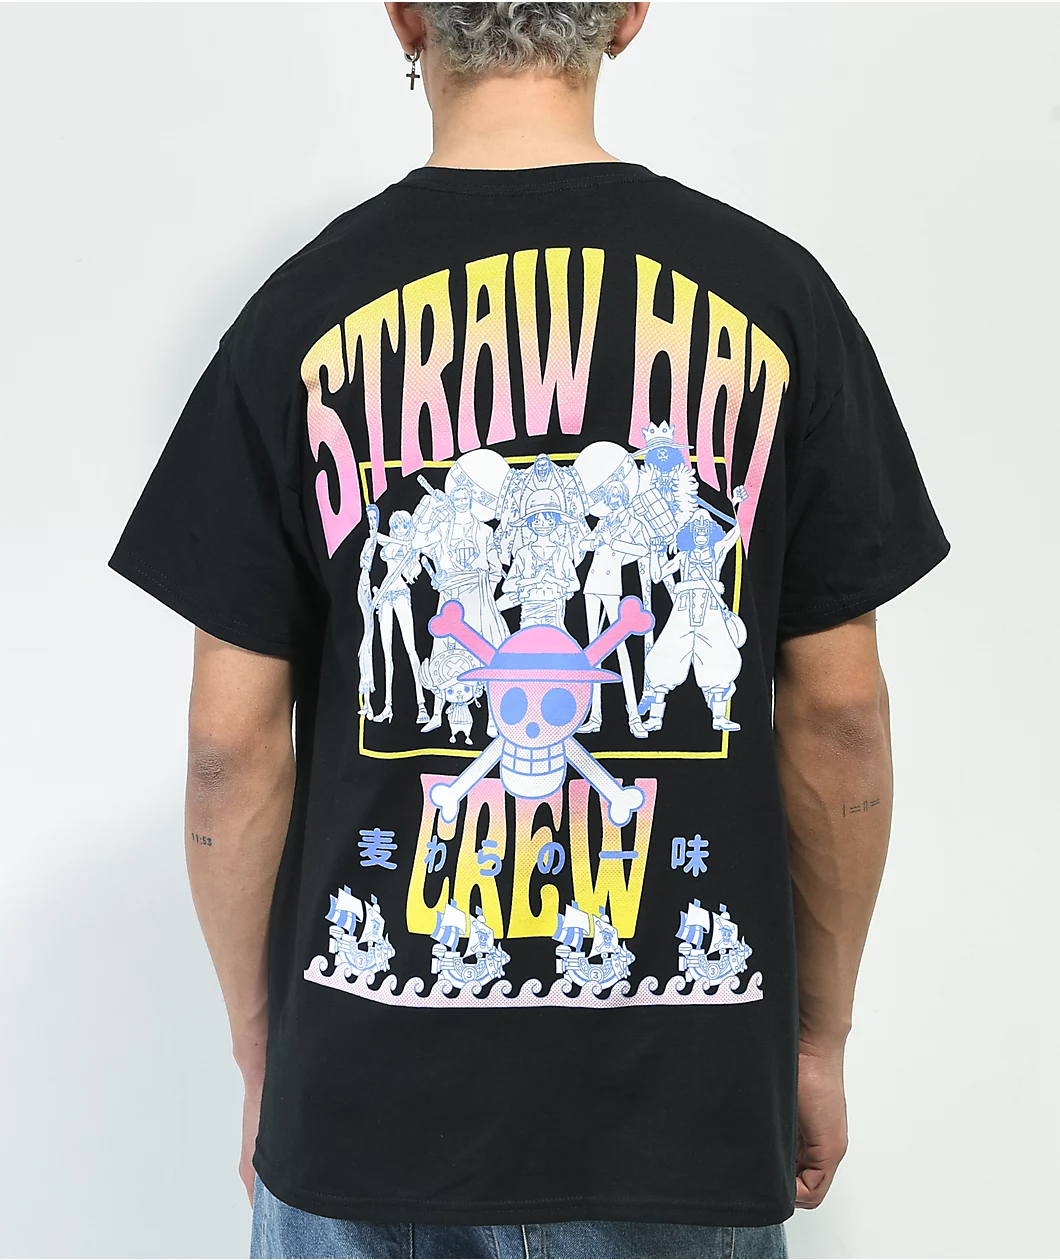 One Piece Straw Hat Crew Black T Shirt 358939 front US - One Piece Clothing